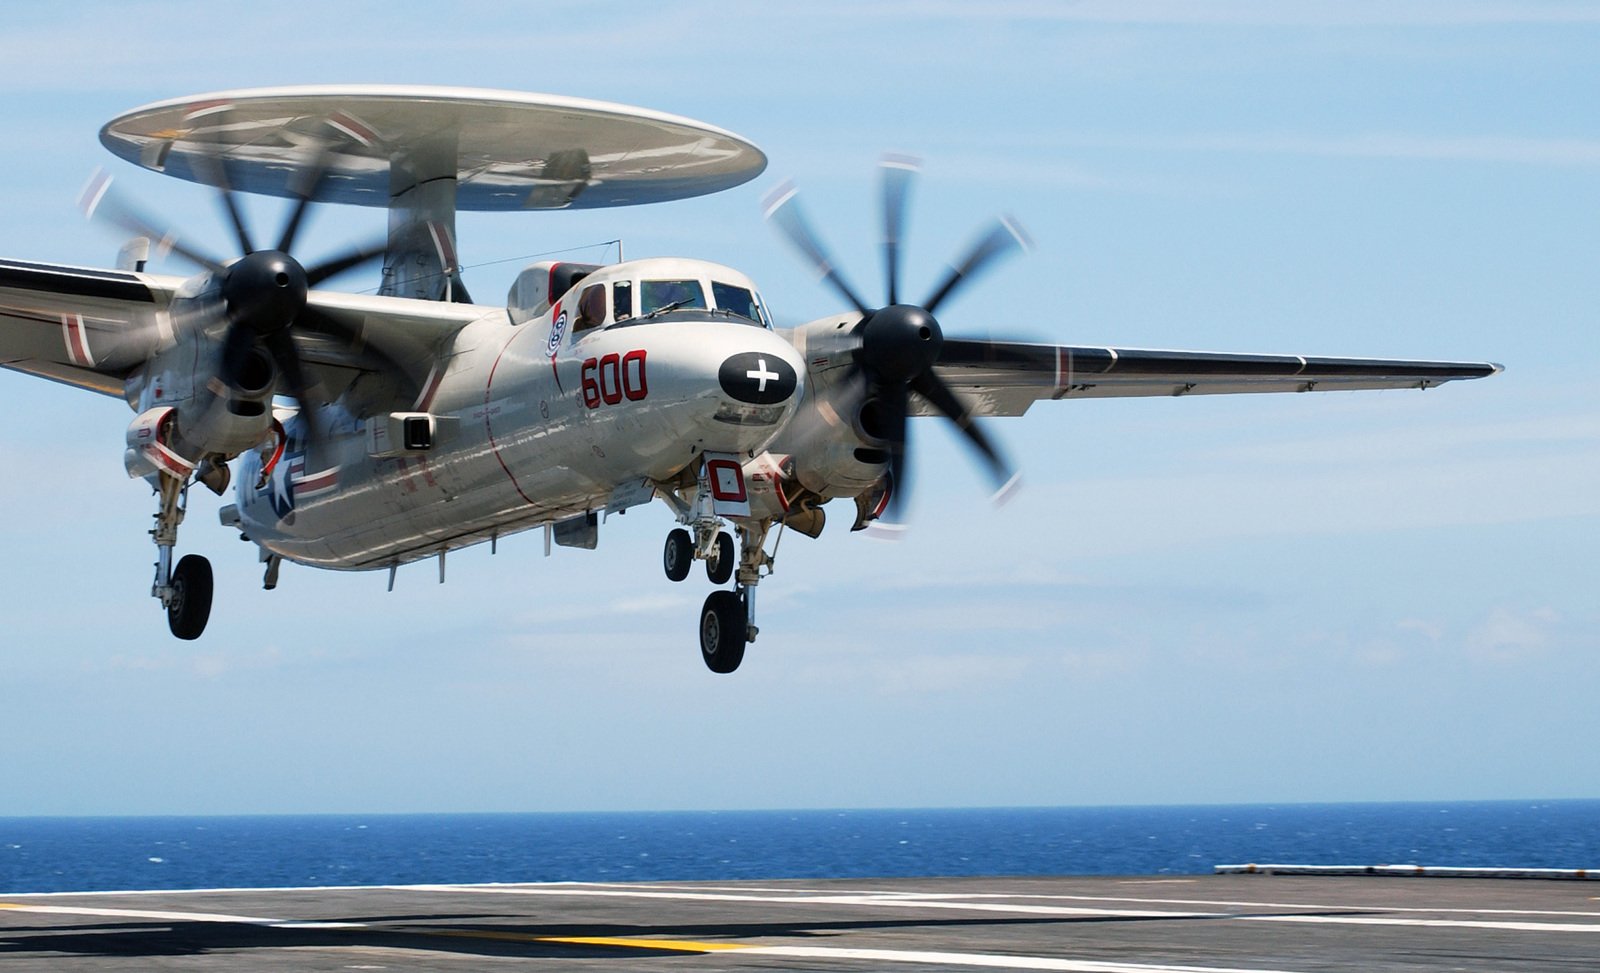 A US Navy (USN E2C Hawkeye airborne early warning aircraft, with the